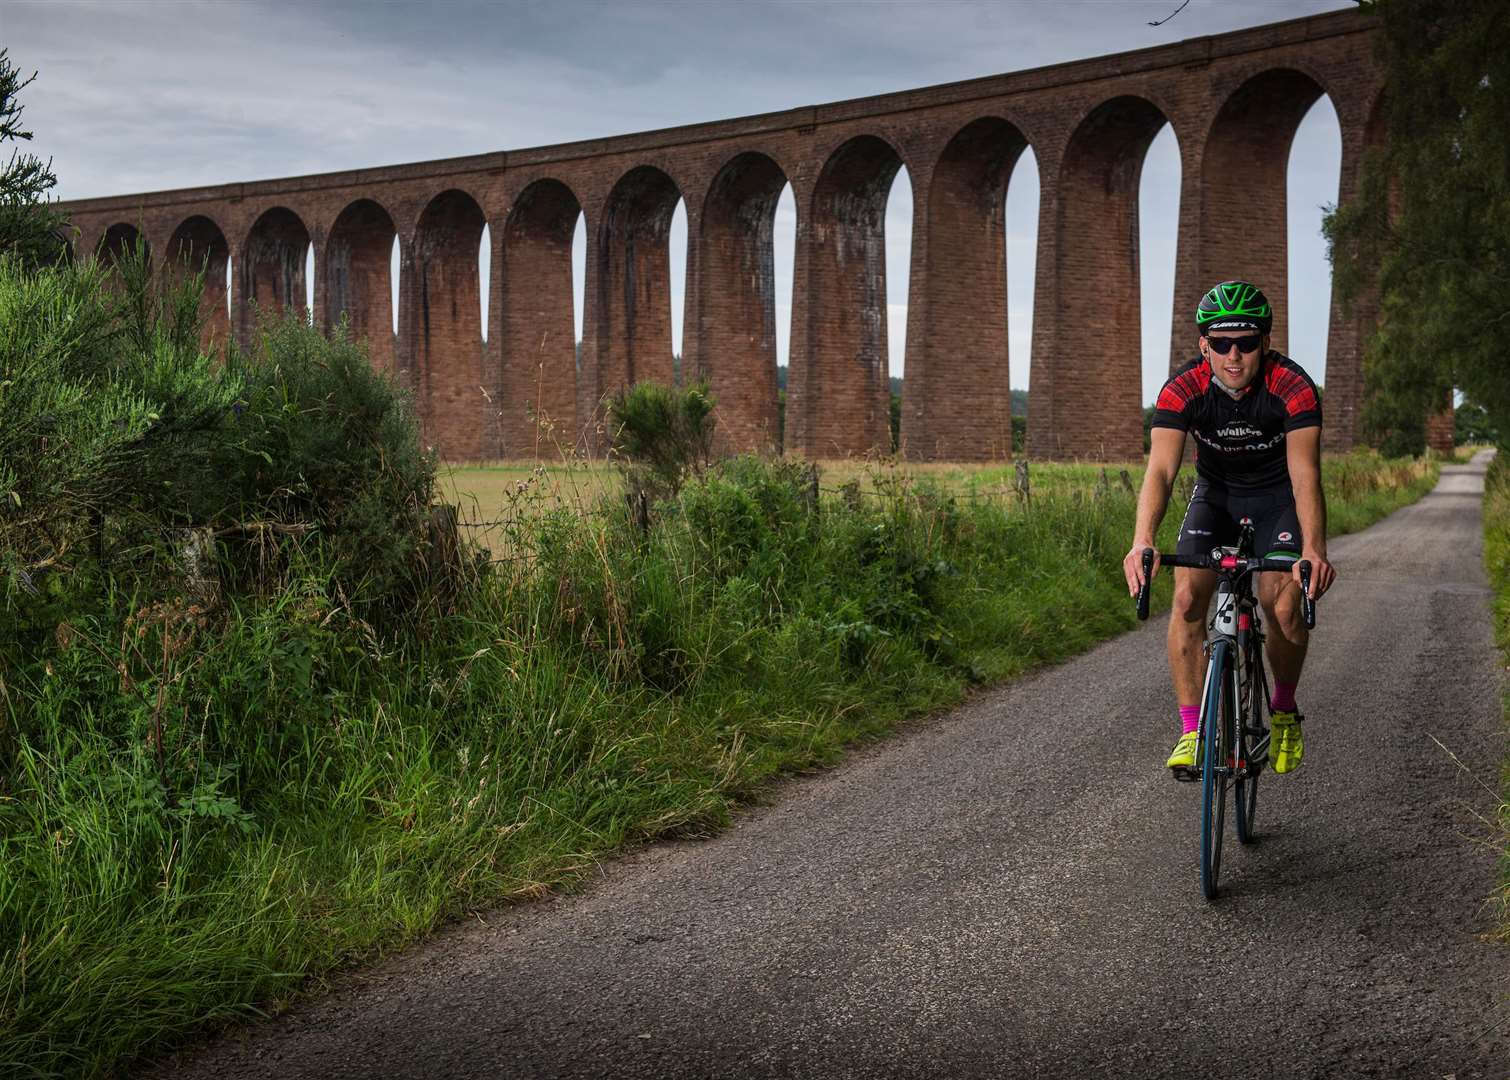 Ride the North takes cyclists on a scenic tour through the Inverness, Moray and Aberdeenshire countryside.